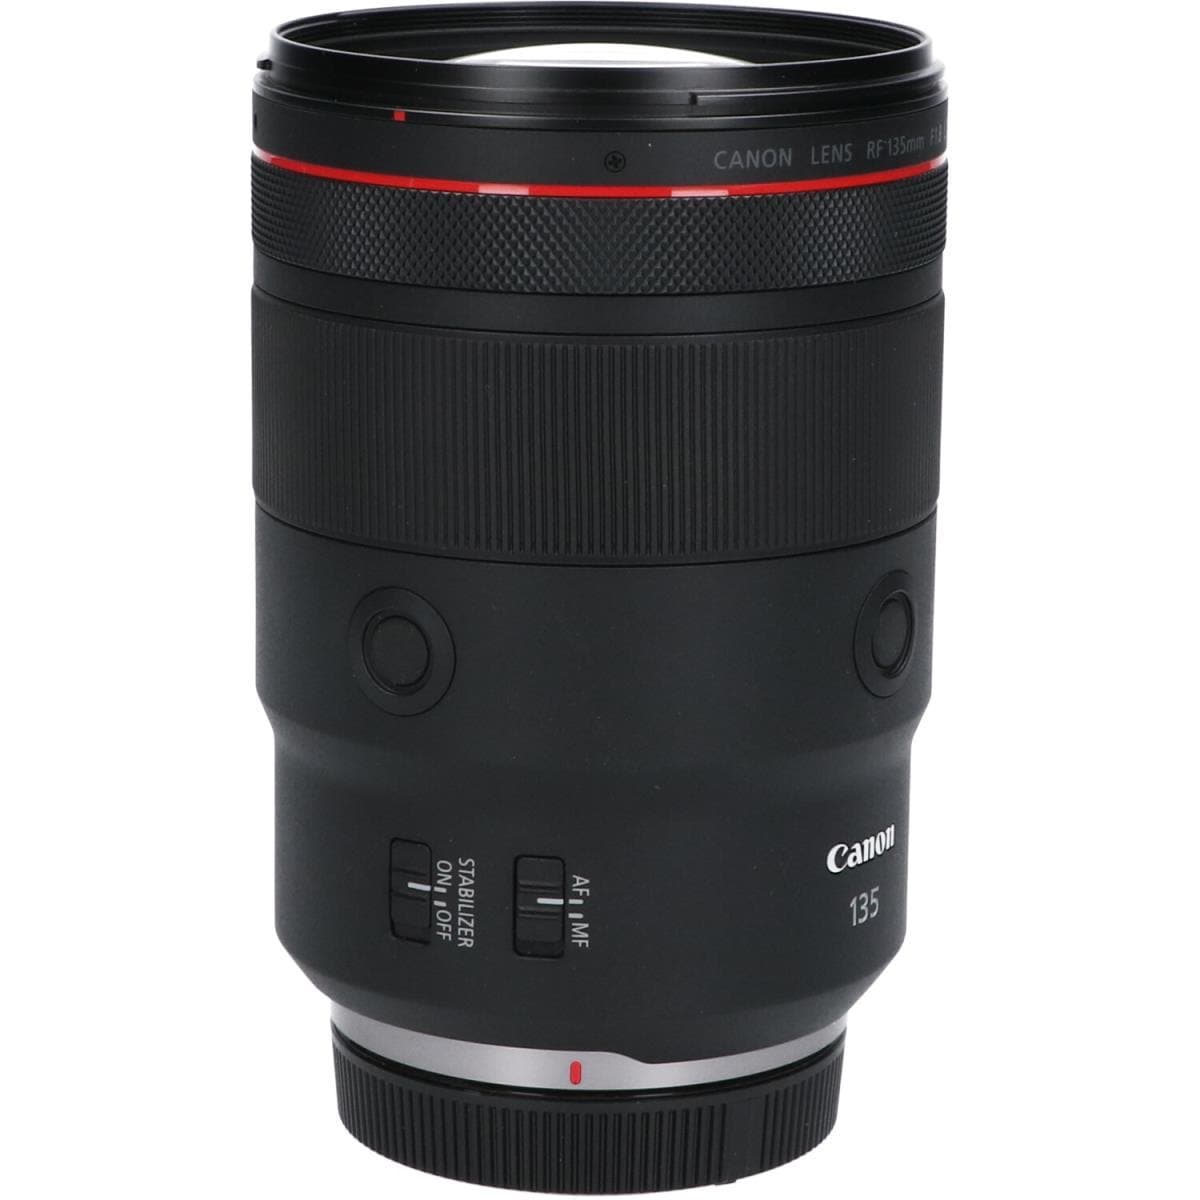 CANON RF135mm F1.8L IS USM